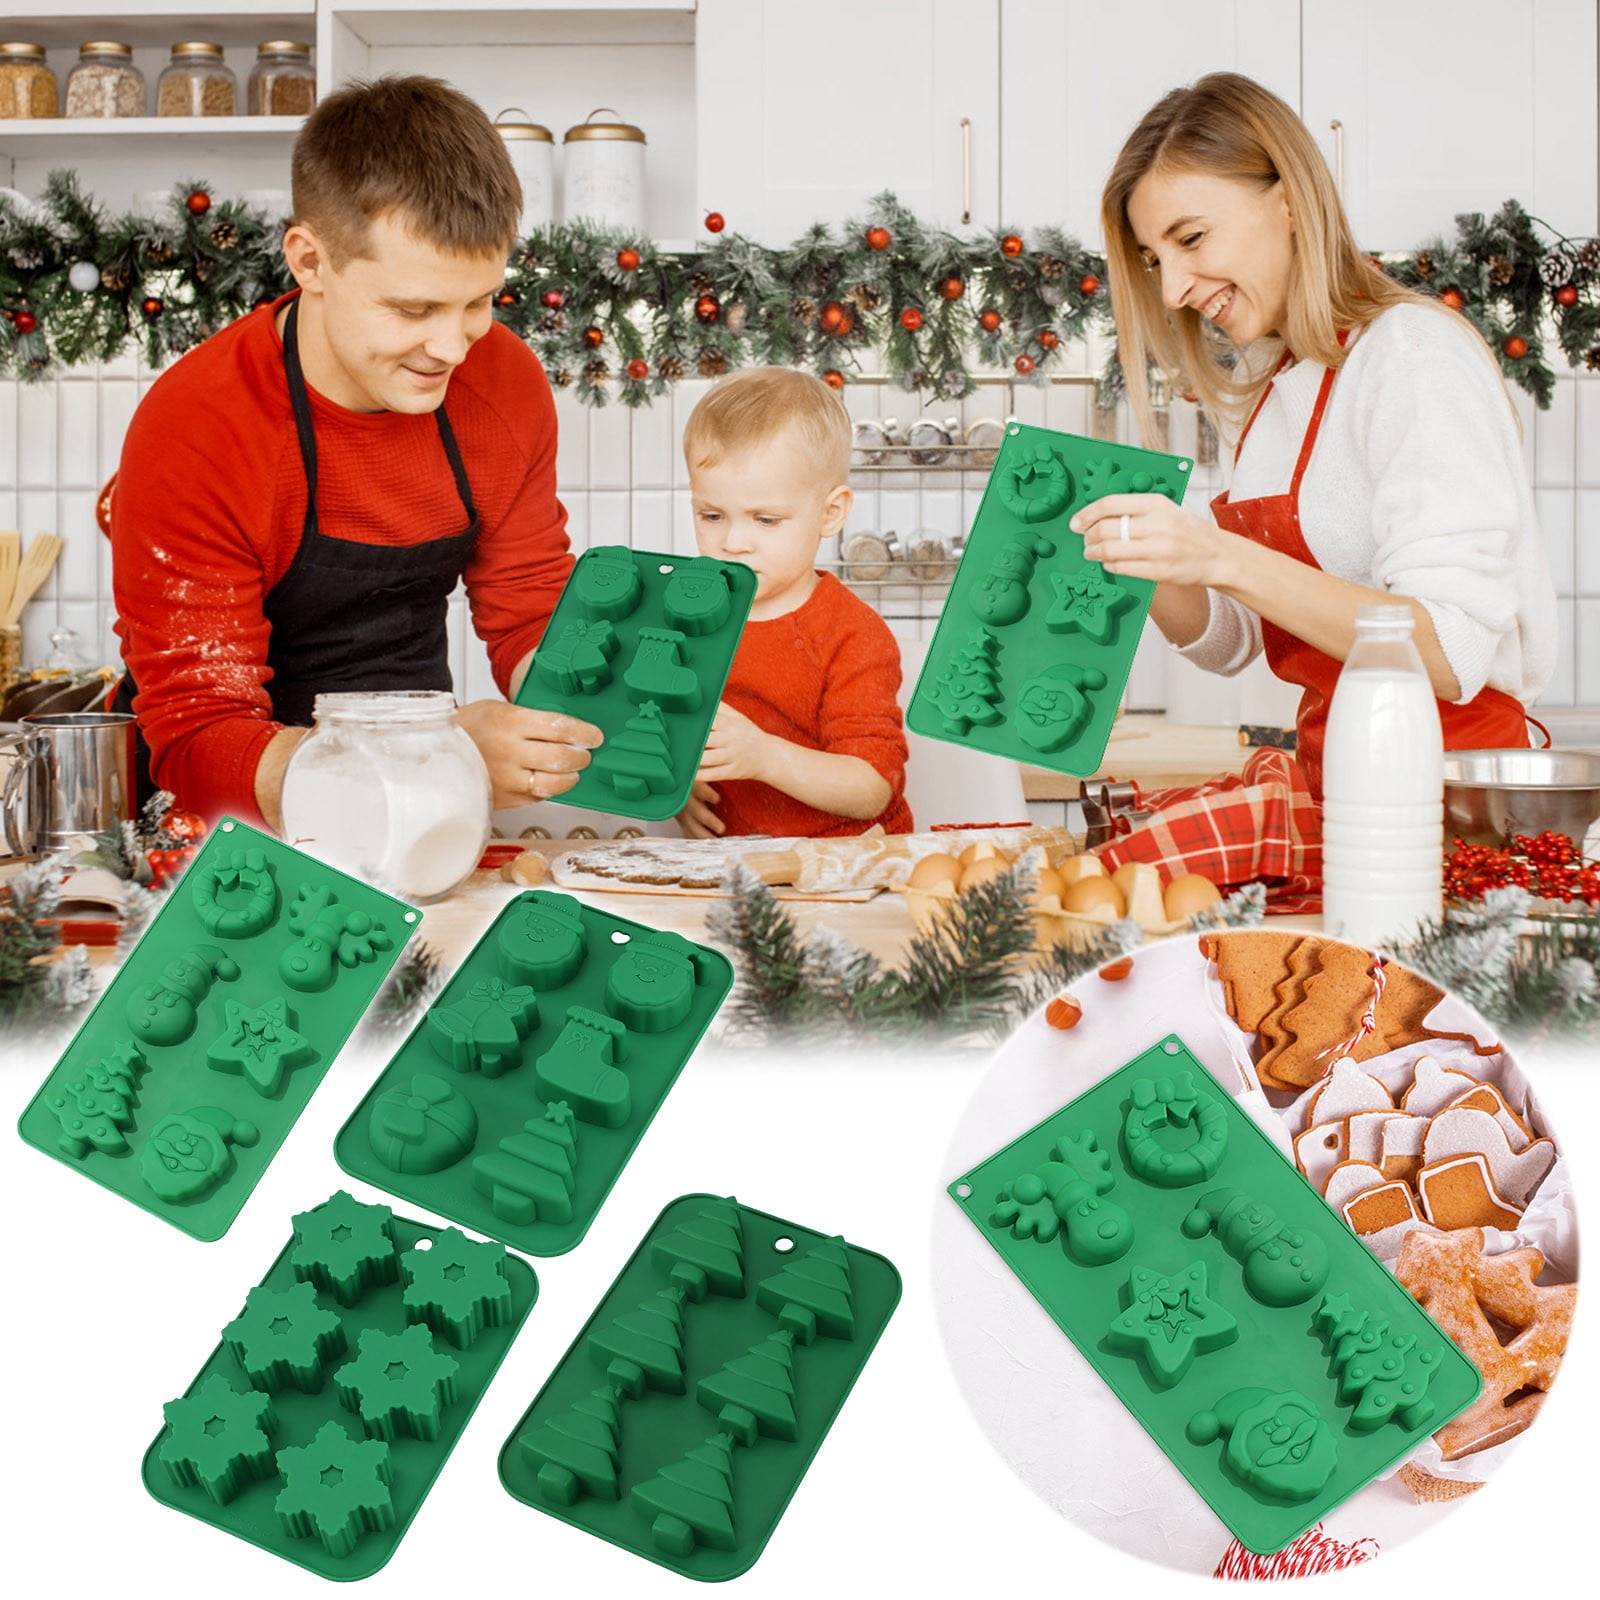 1PC Christmas Silicone Molds Chocolate Molds Candy Molds Baking Molds Large  for Baking Sweet Treat,Cake Xmas Gift Handmade Soap Candles with Shape of